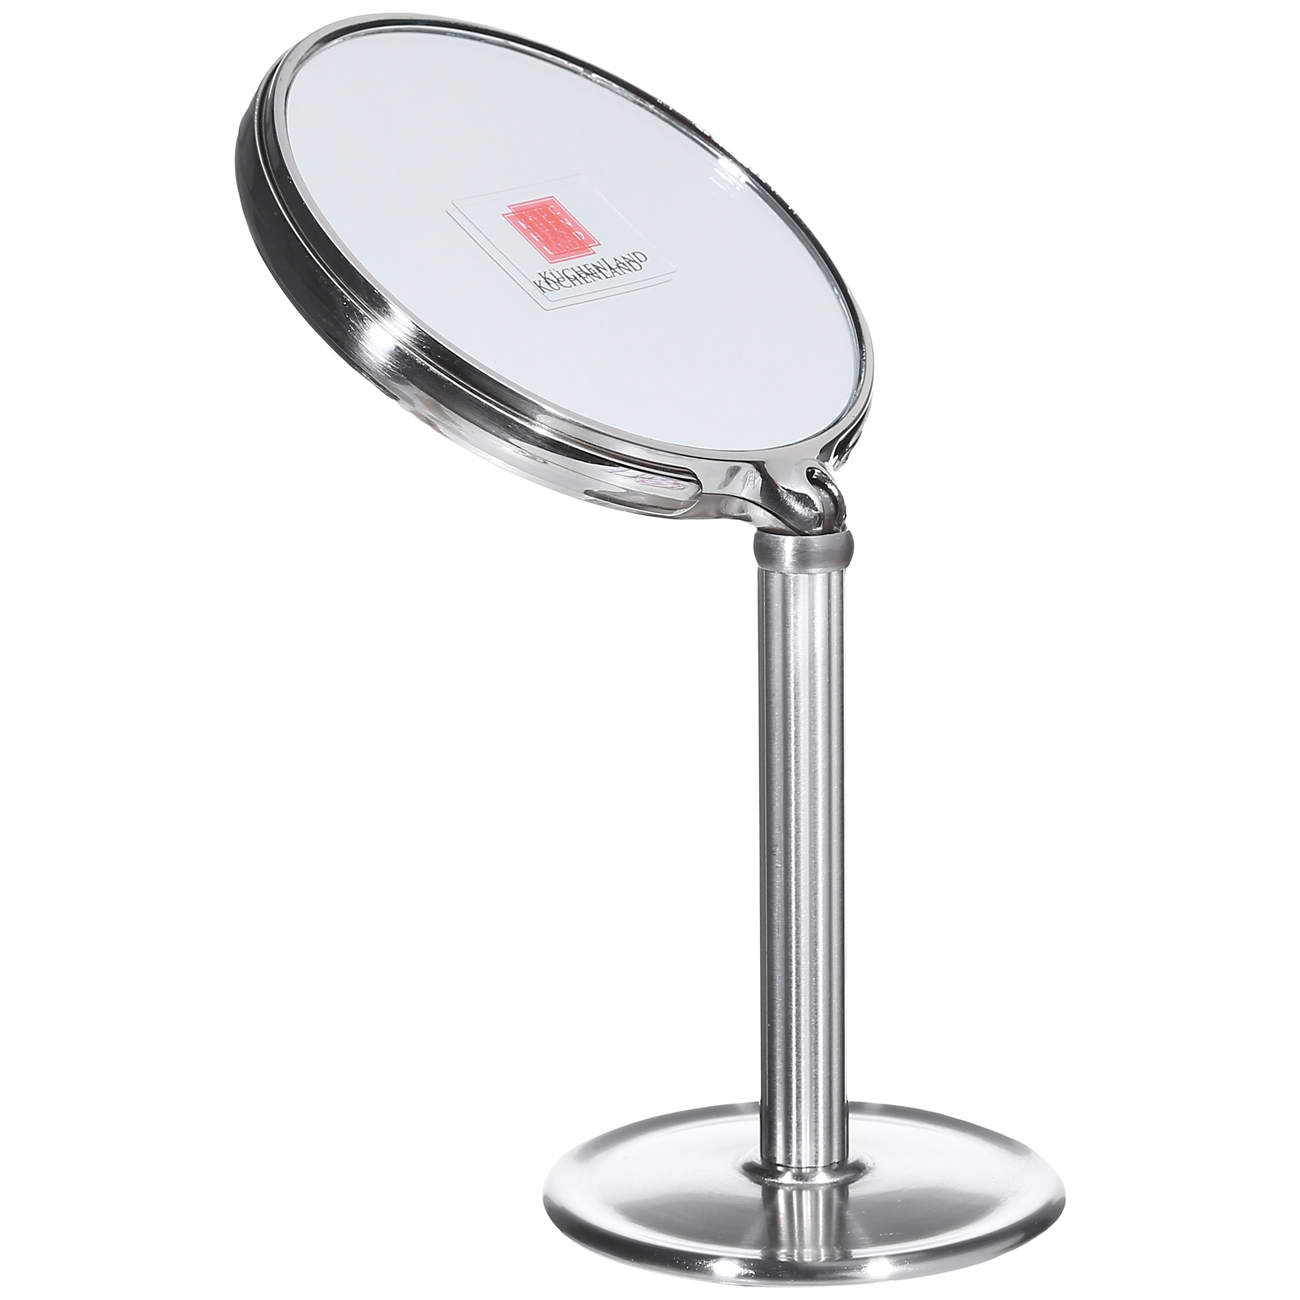 Table mirror, 17 cm, double-sided, on a leg, metal, round, Fantastic изображение № 2